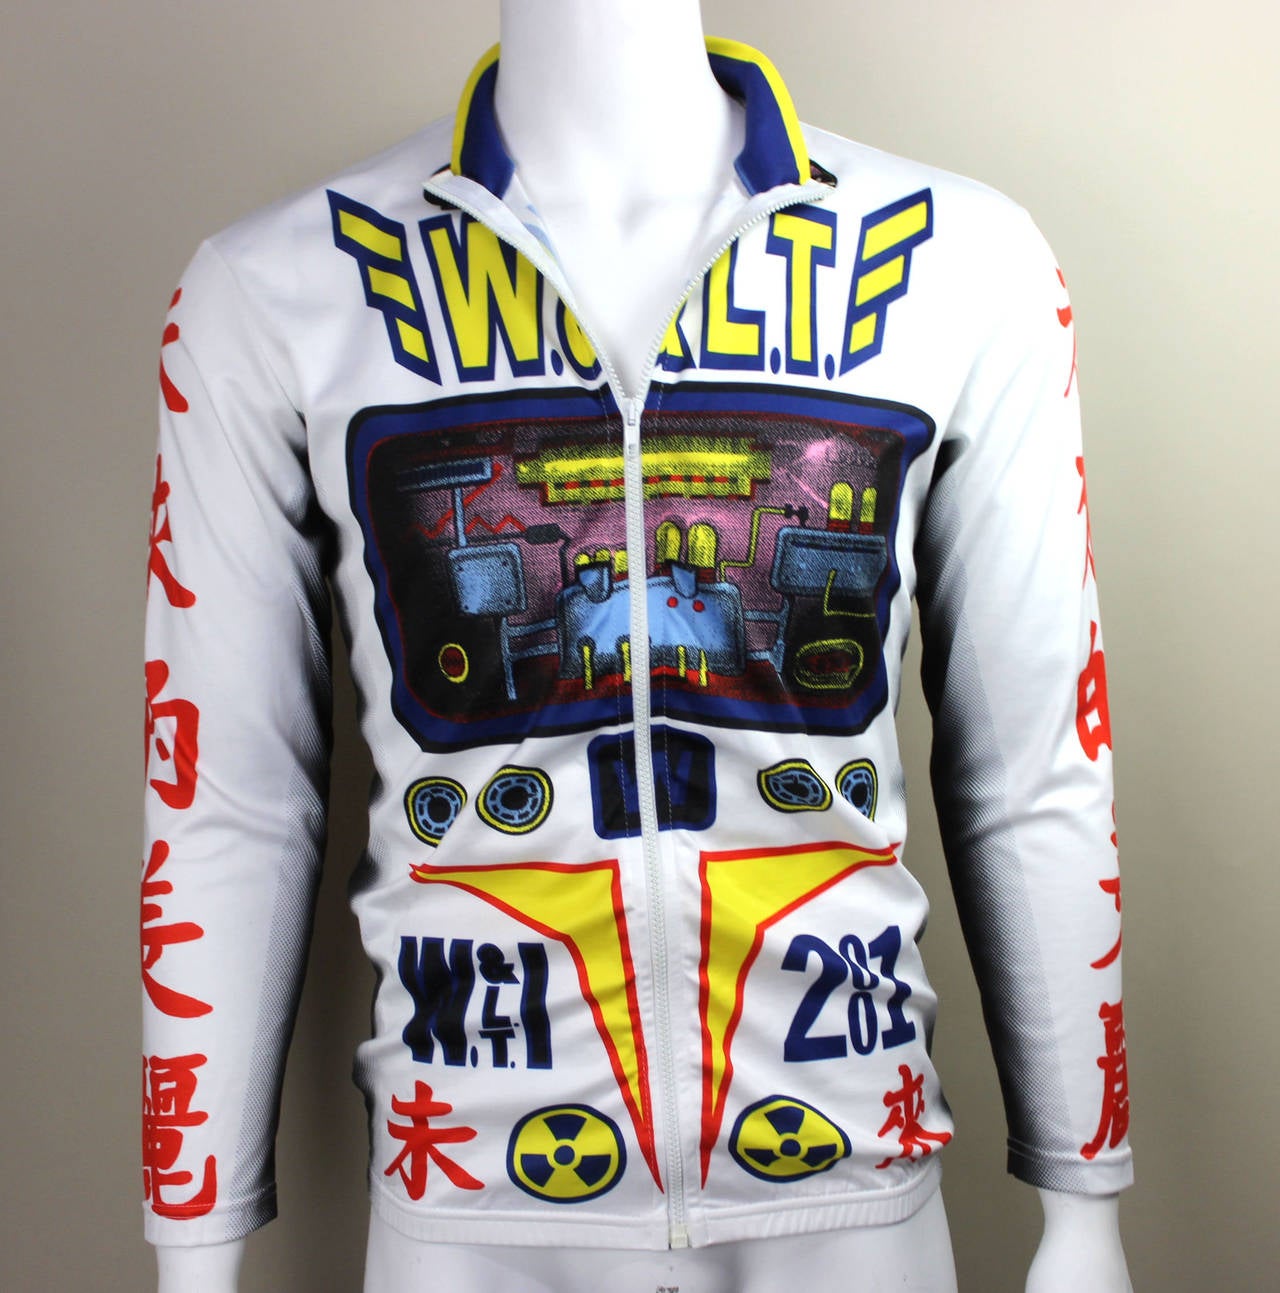 Pieces from Walter Van Beirendonck's 1990's collections are rare and hard to find. This zip-up jacket was part of his 